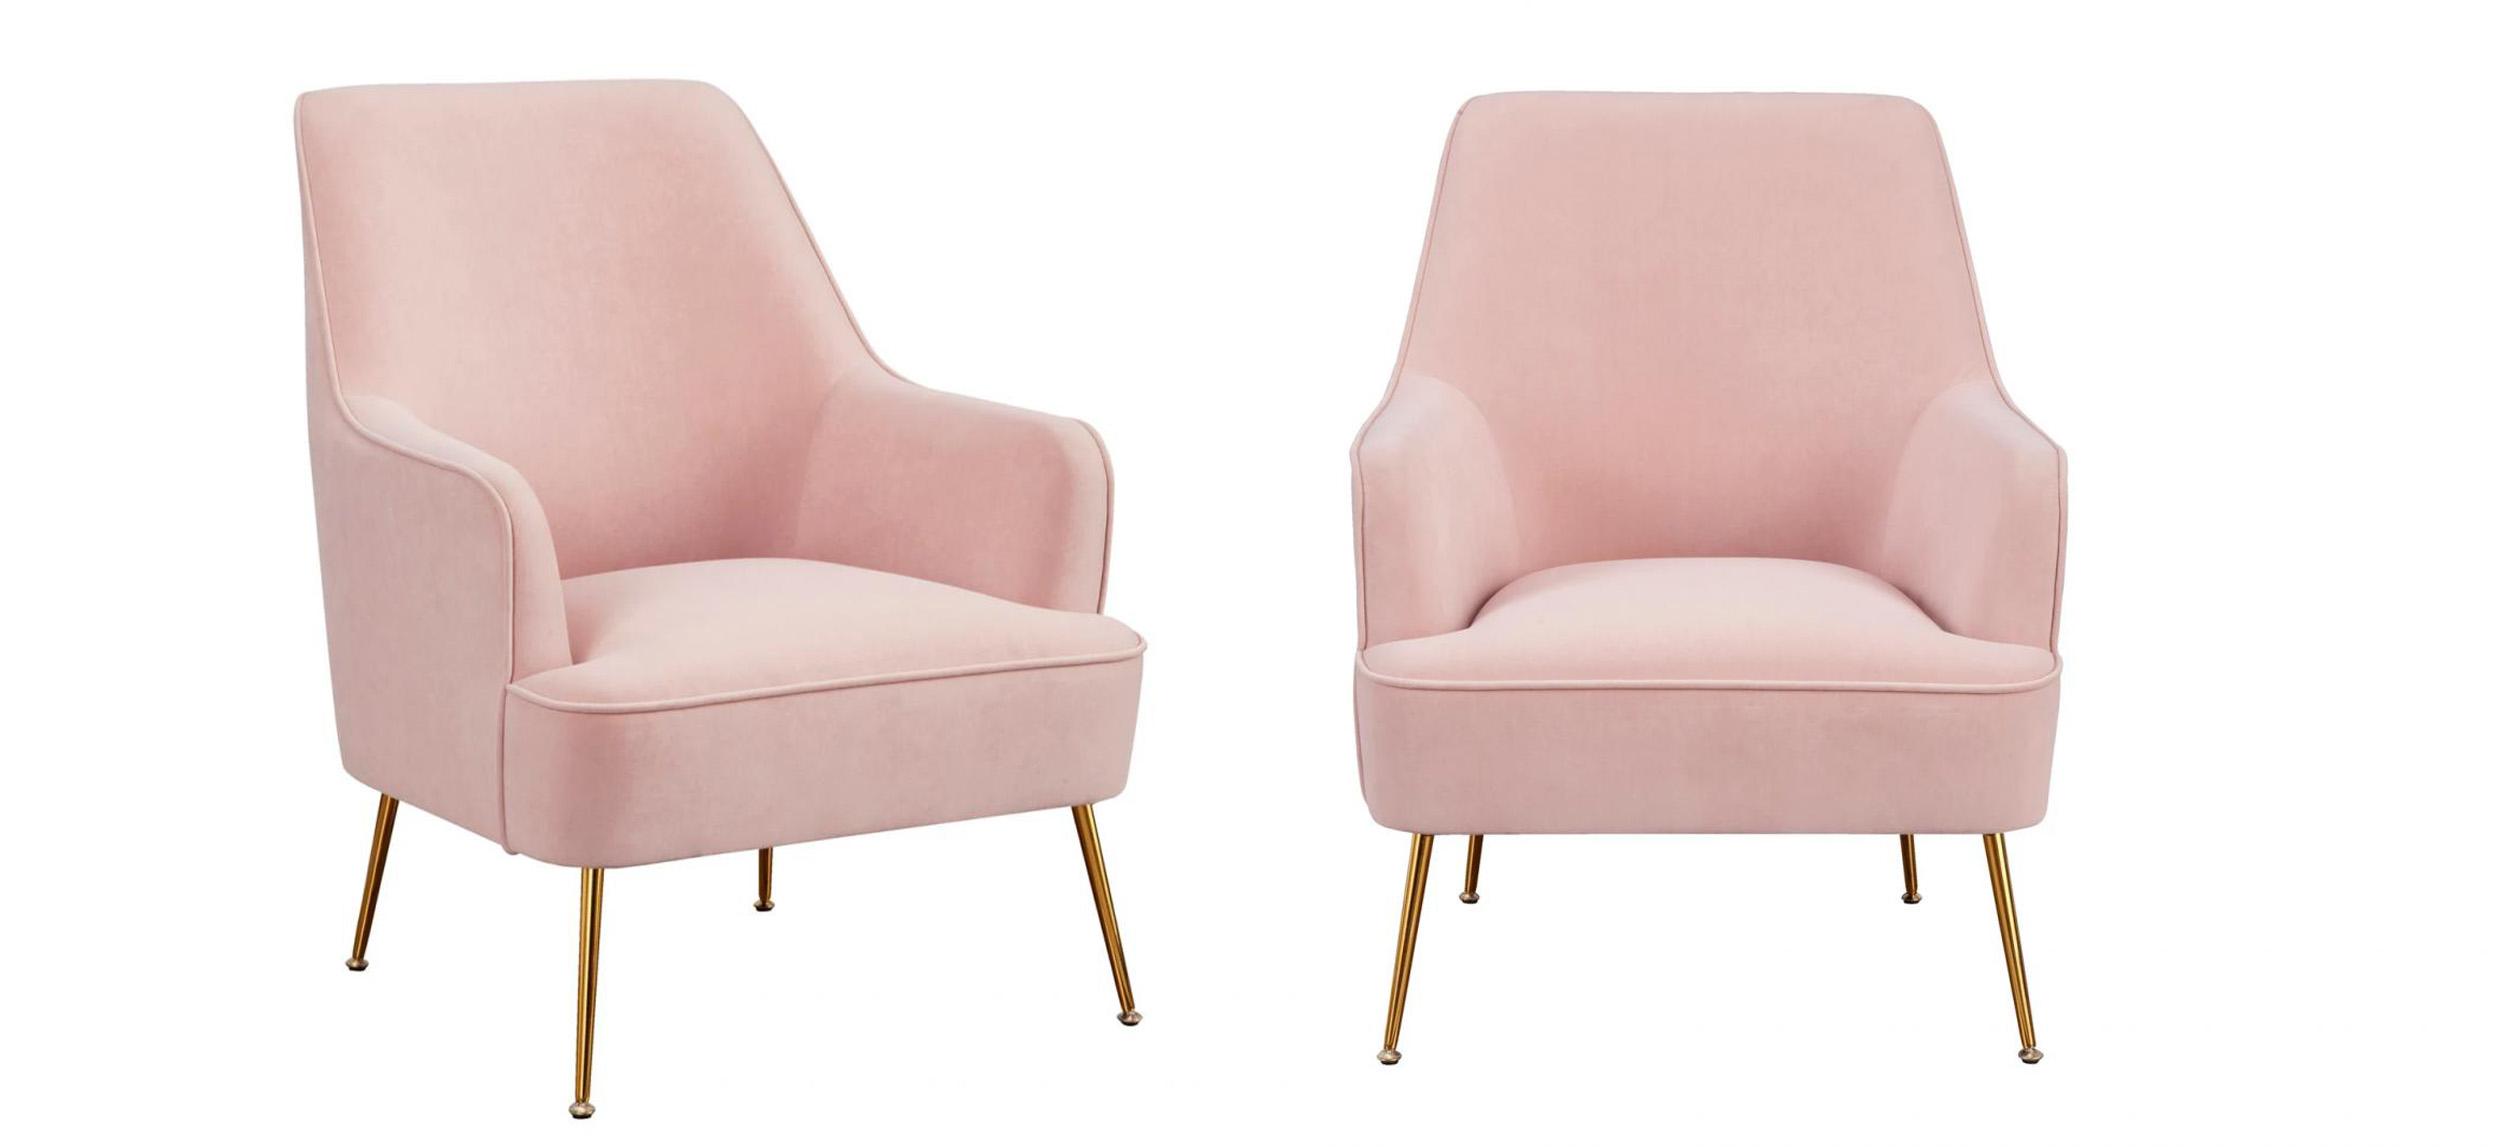 Contemporary, Modern Arm Chair Set REBECCA 9010-1-PNK-Set-2 in Pink Fabric